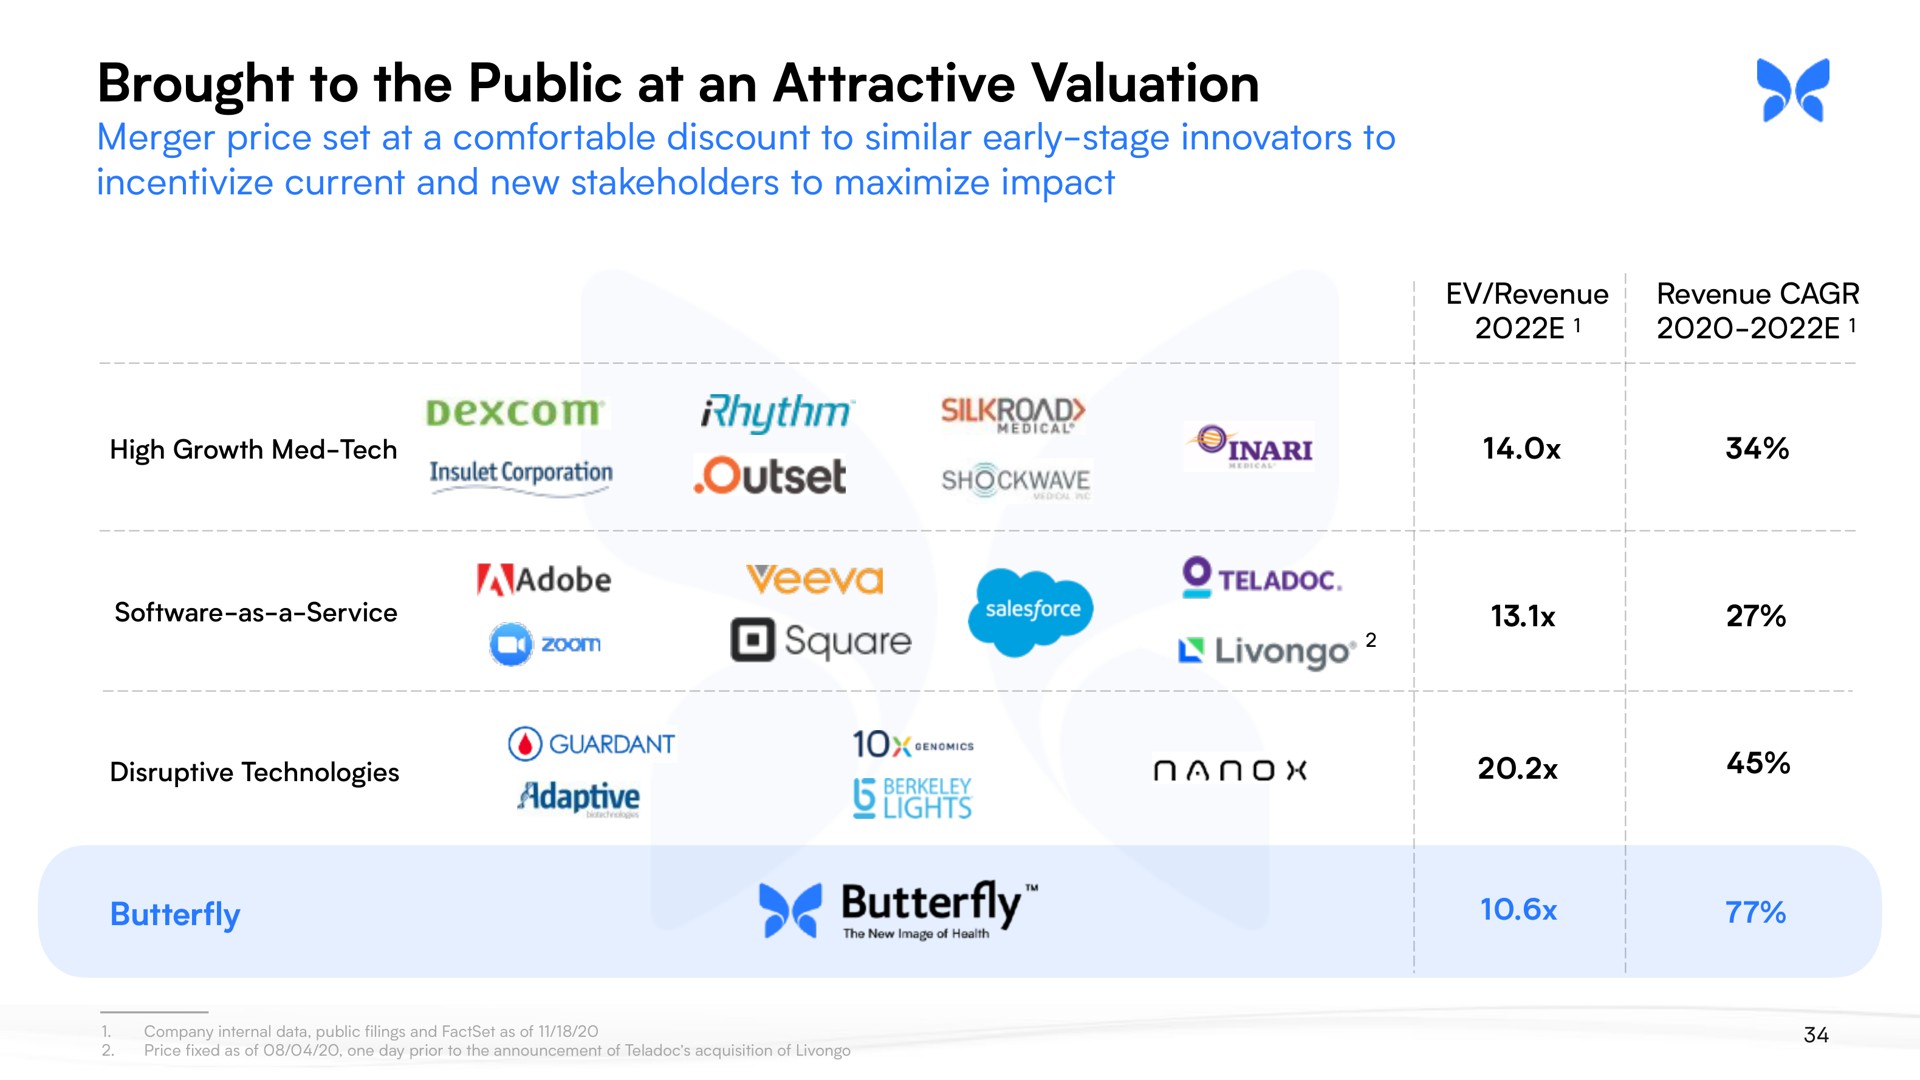 brought to the public at an attractive valuation rhythm adobe | Butterfly